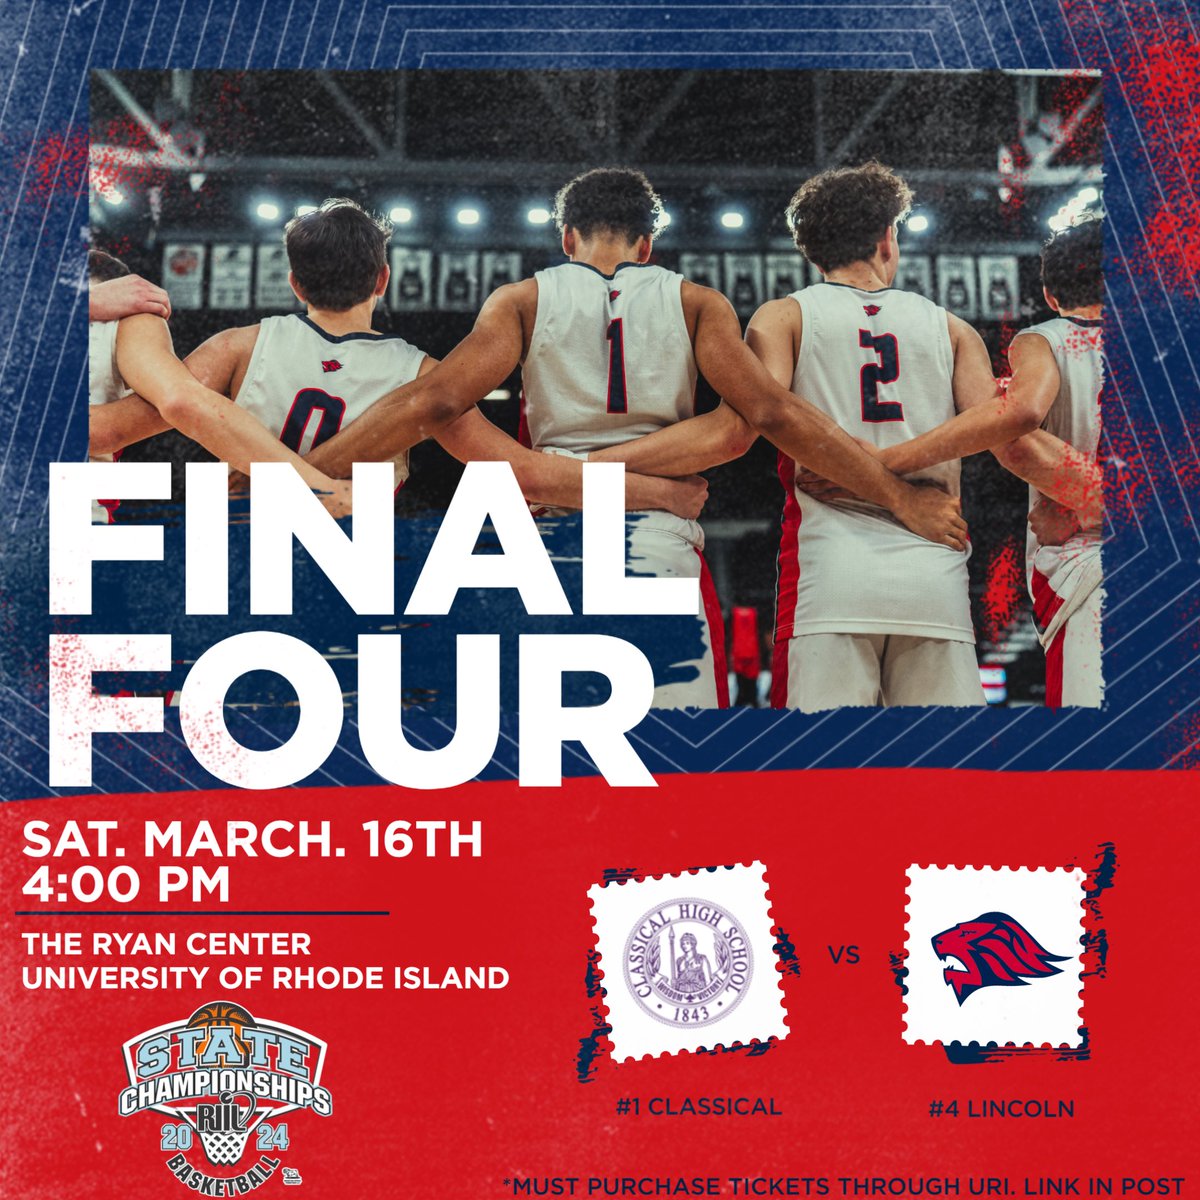 Lions continue to dance this March, punching our ticket to the RIIL State Open Final Four this weekend to face #1 Classical! 

⌚️ 4:00 PM
📅 Saturday, March 16th
📍University of Rhode Island
🎟️ shorturl.at/hsyNW

@LHSRI_Athletics | @LHSRI